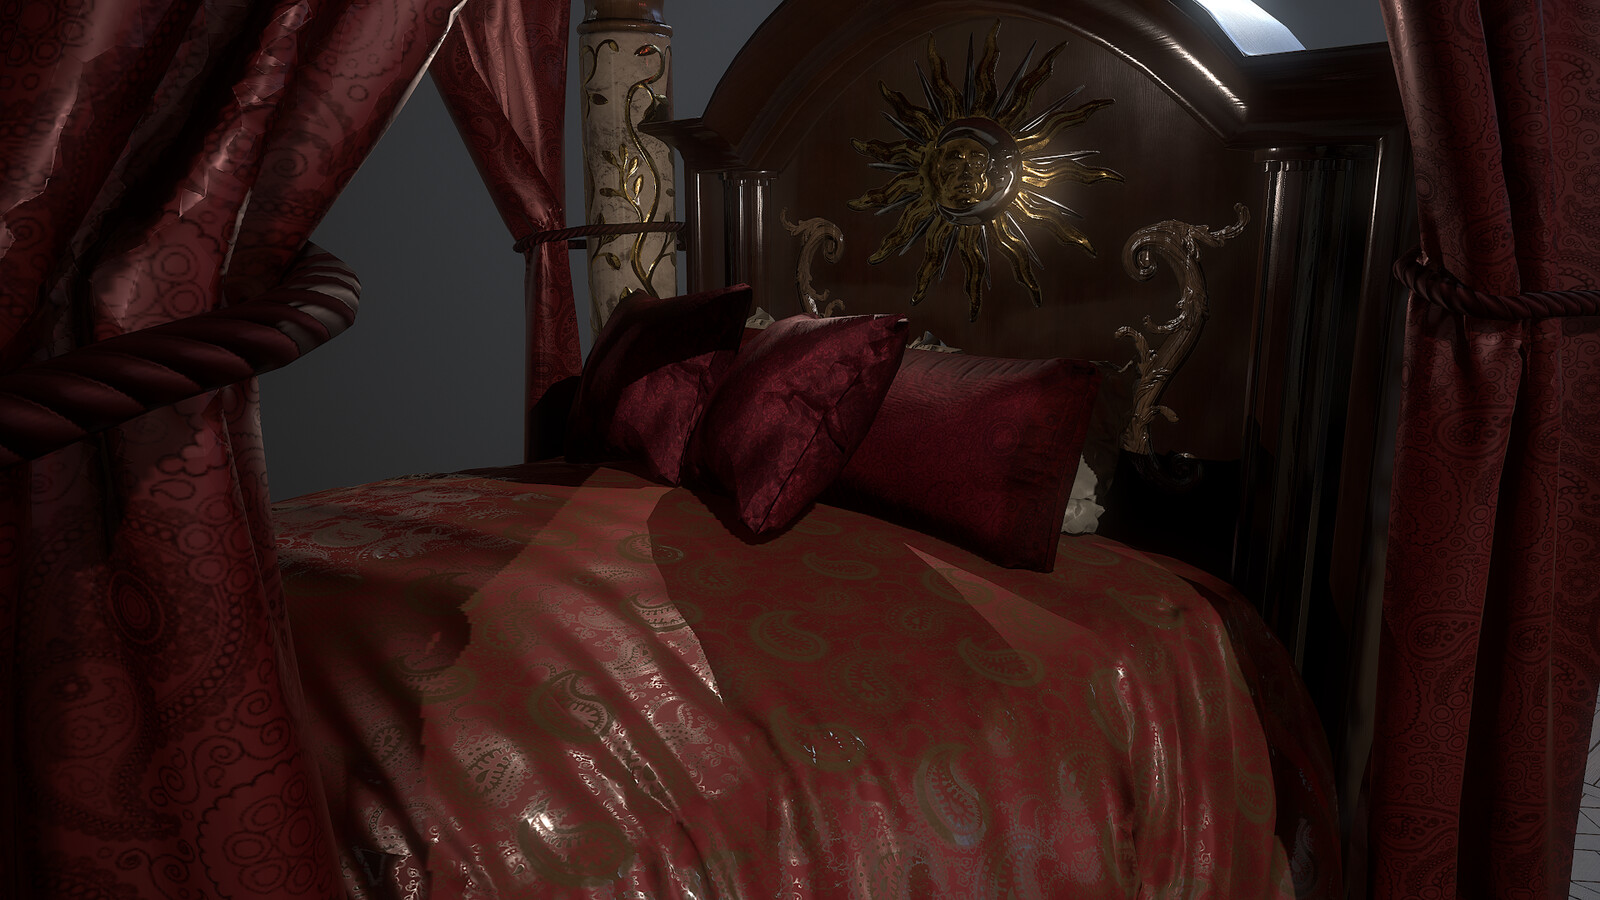 Closeup highlighting the fabrics, which were created in Marvelous Designer and textured in Substance Painter.